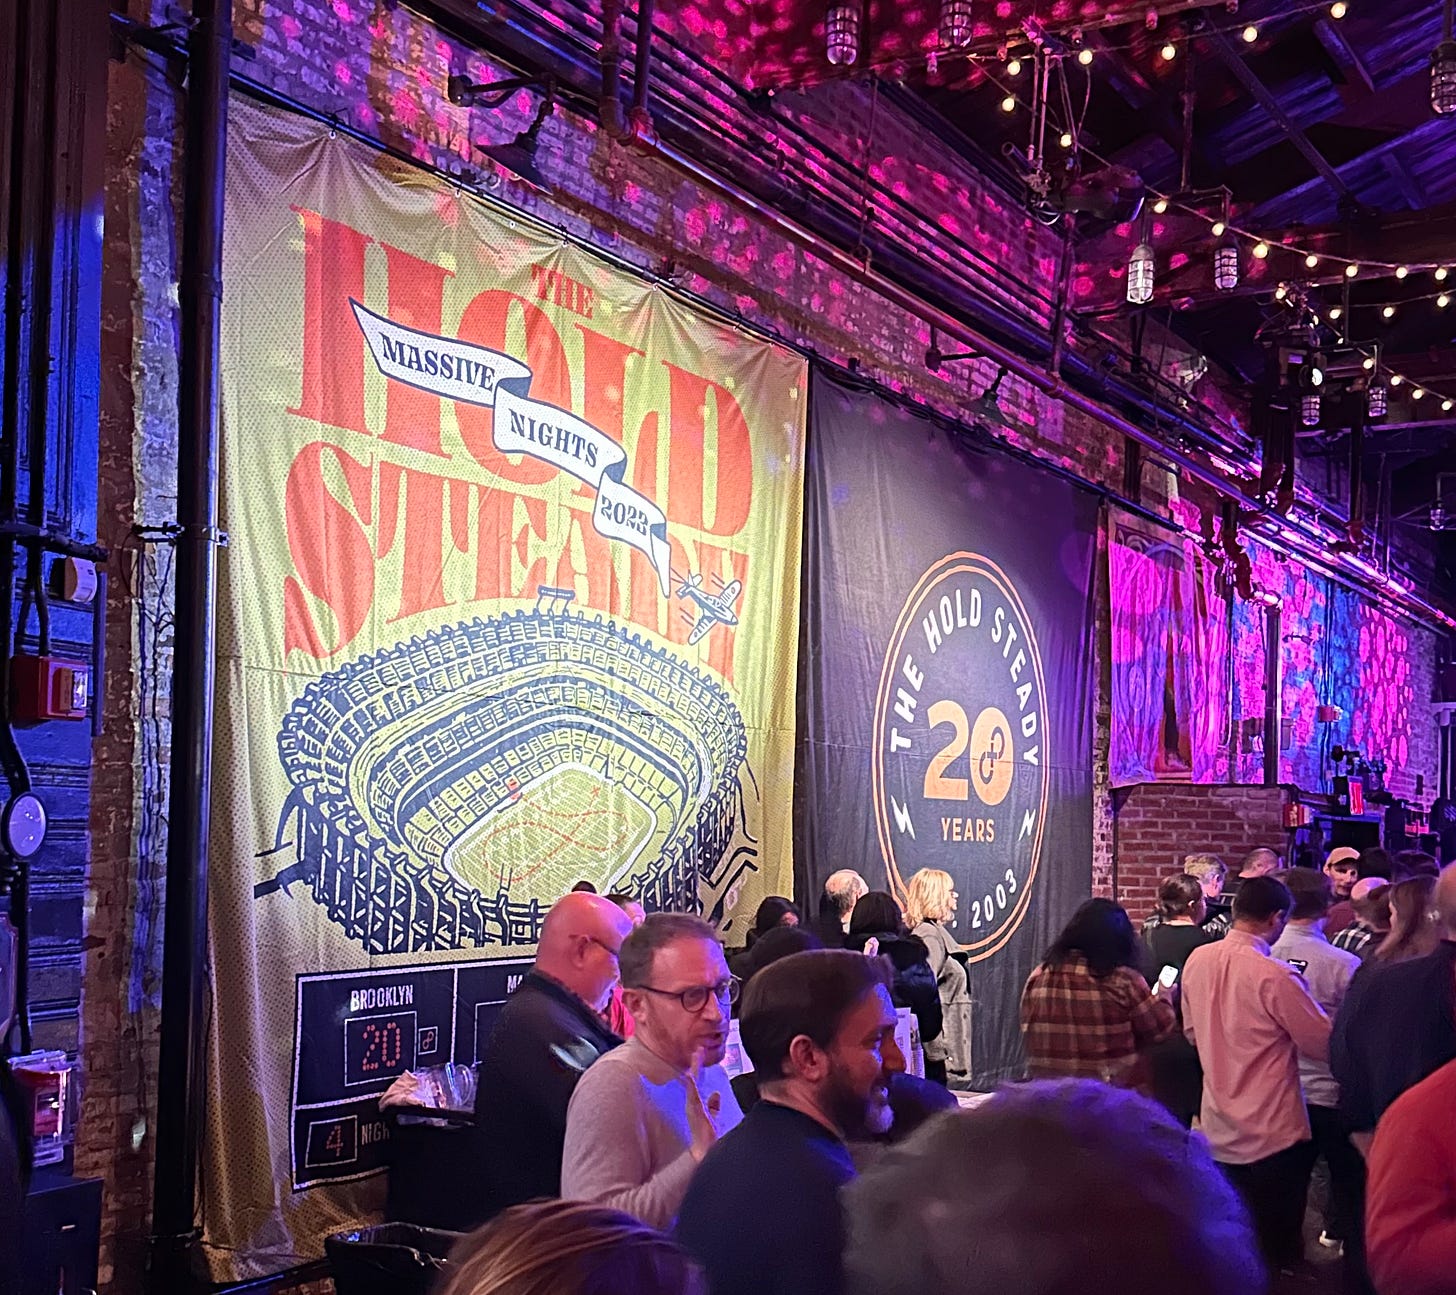 The Hold Steady's big banners, celebrating 20 years, which feels...right. (And is right.)